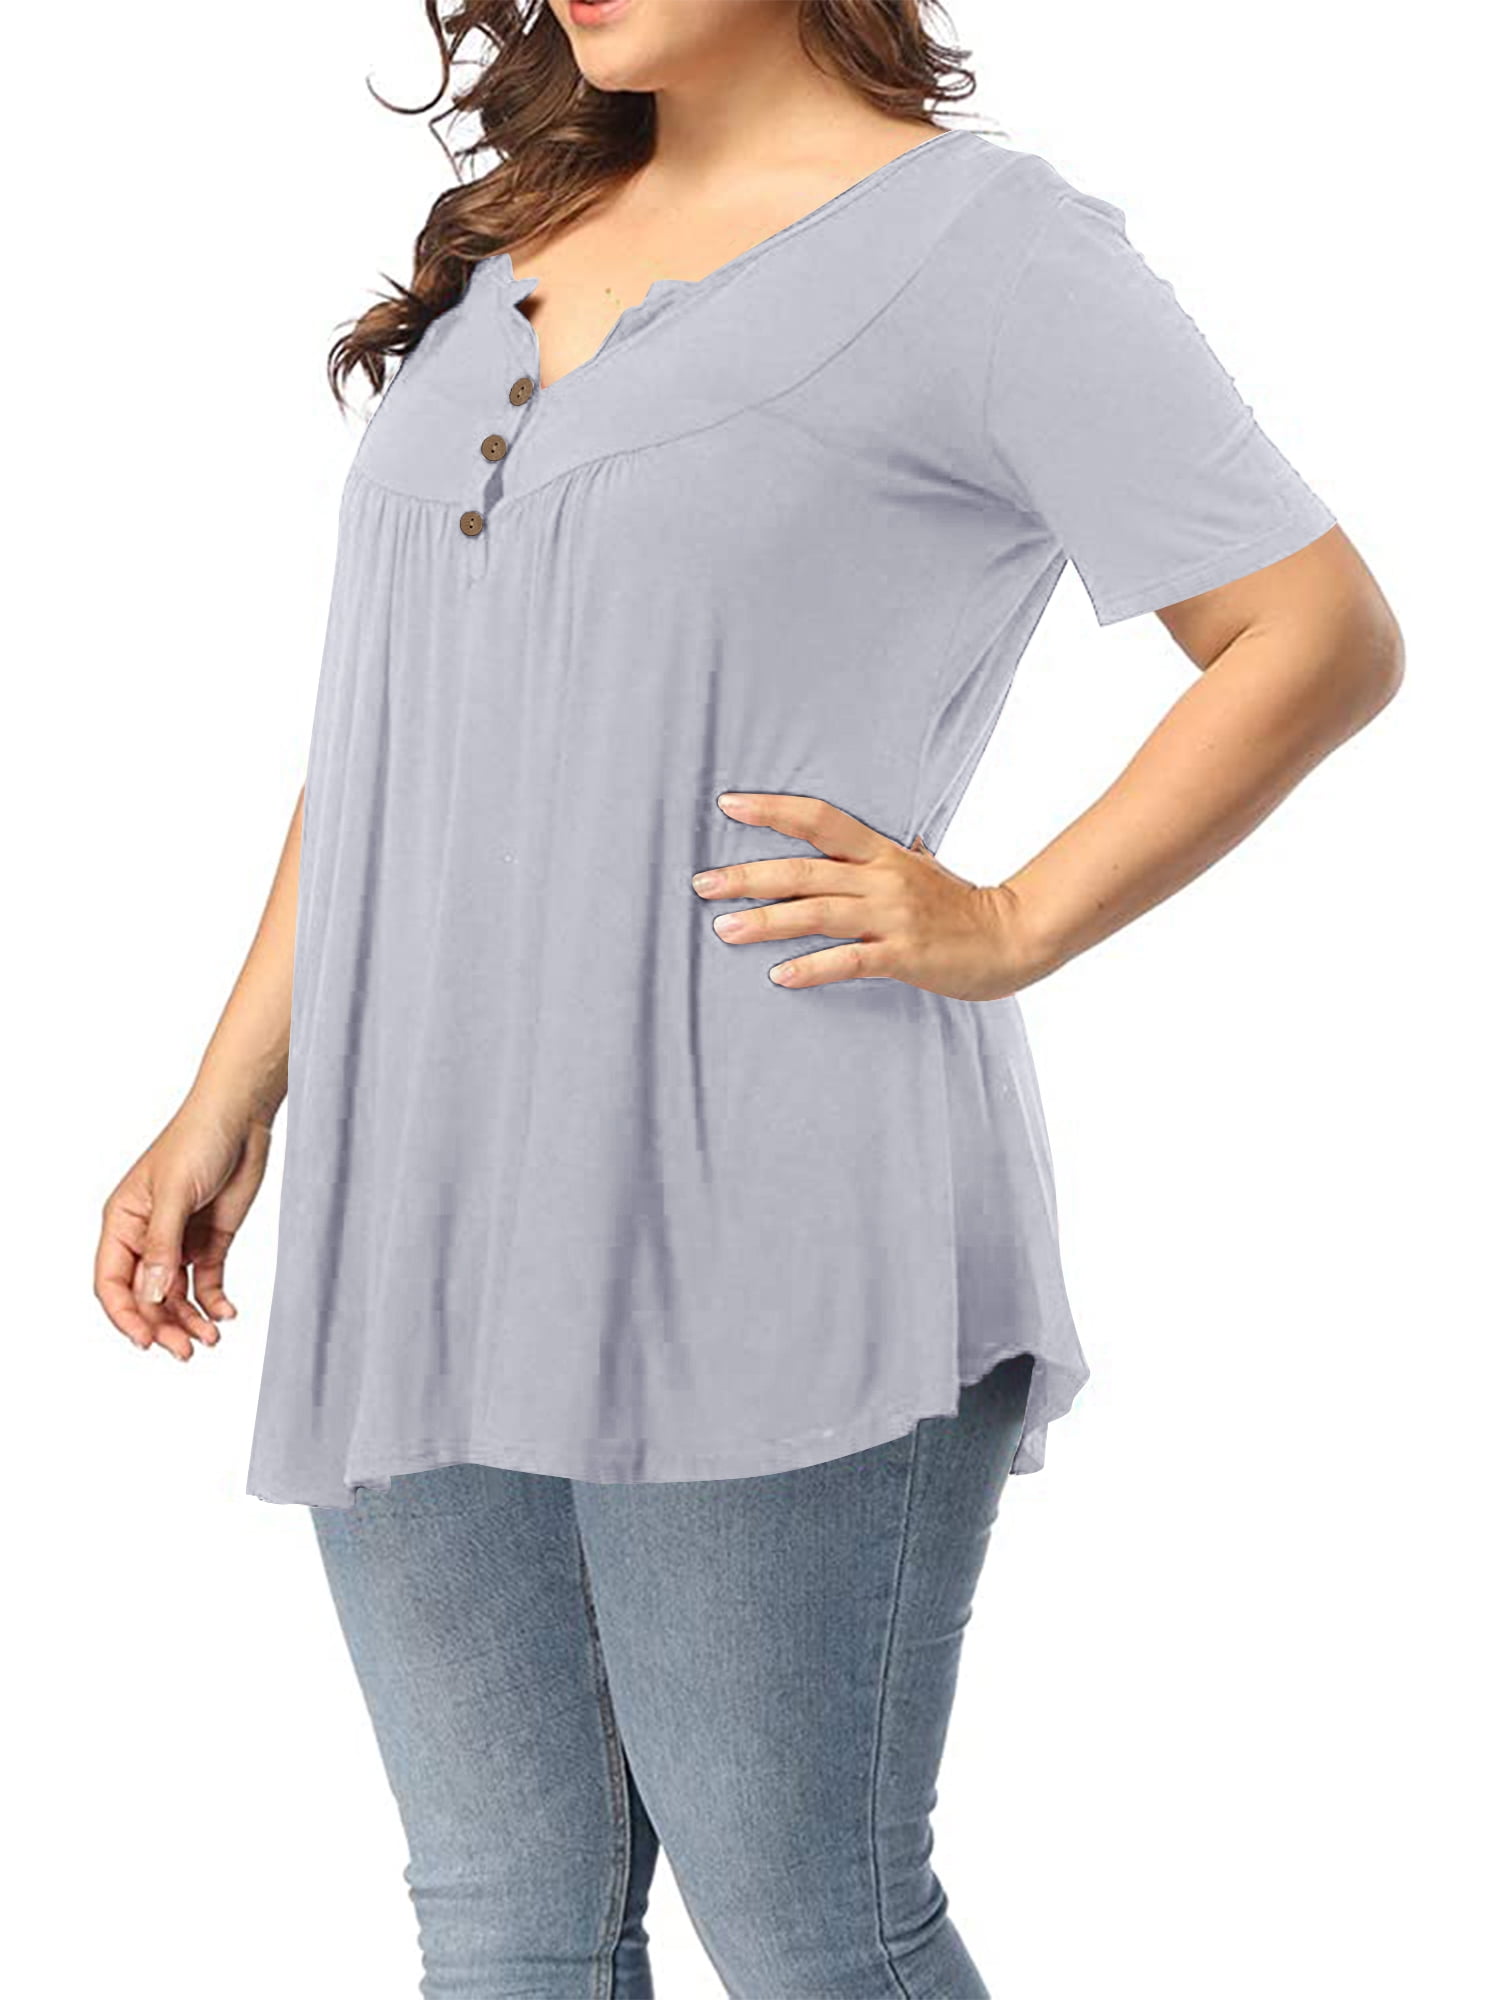 JIOTANG XL-4X Plus Size Top for Women Summer Henley V Neck Short Sleeve Buttons Up Pleated Tunic Tops 